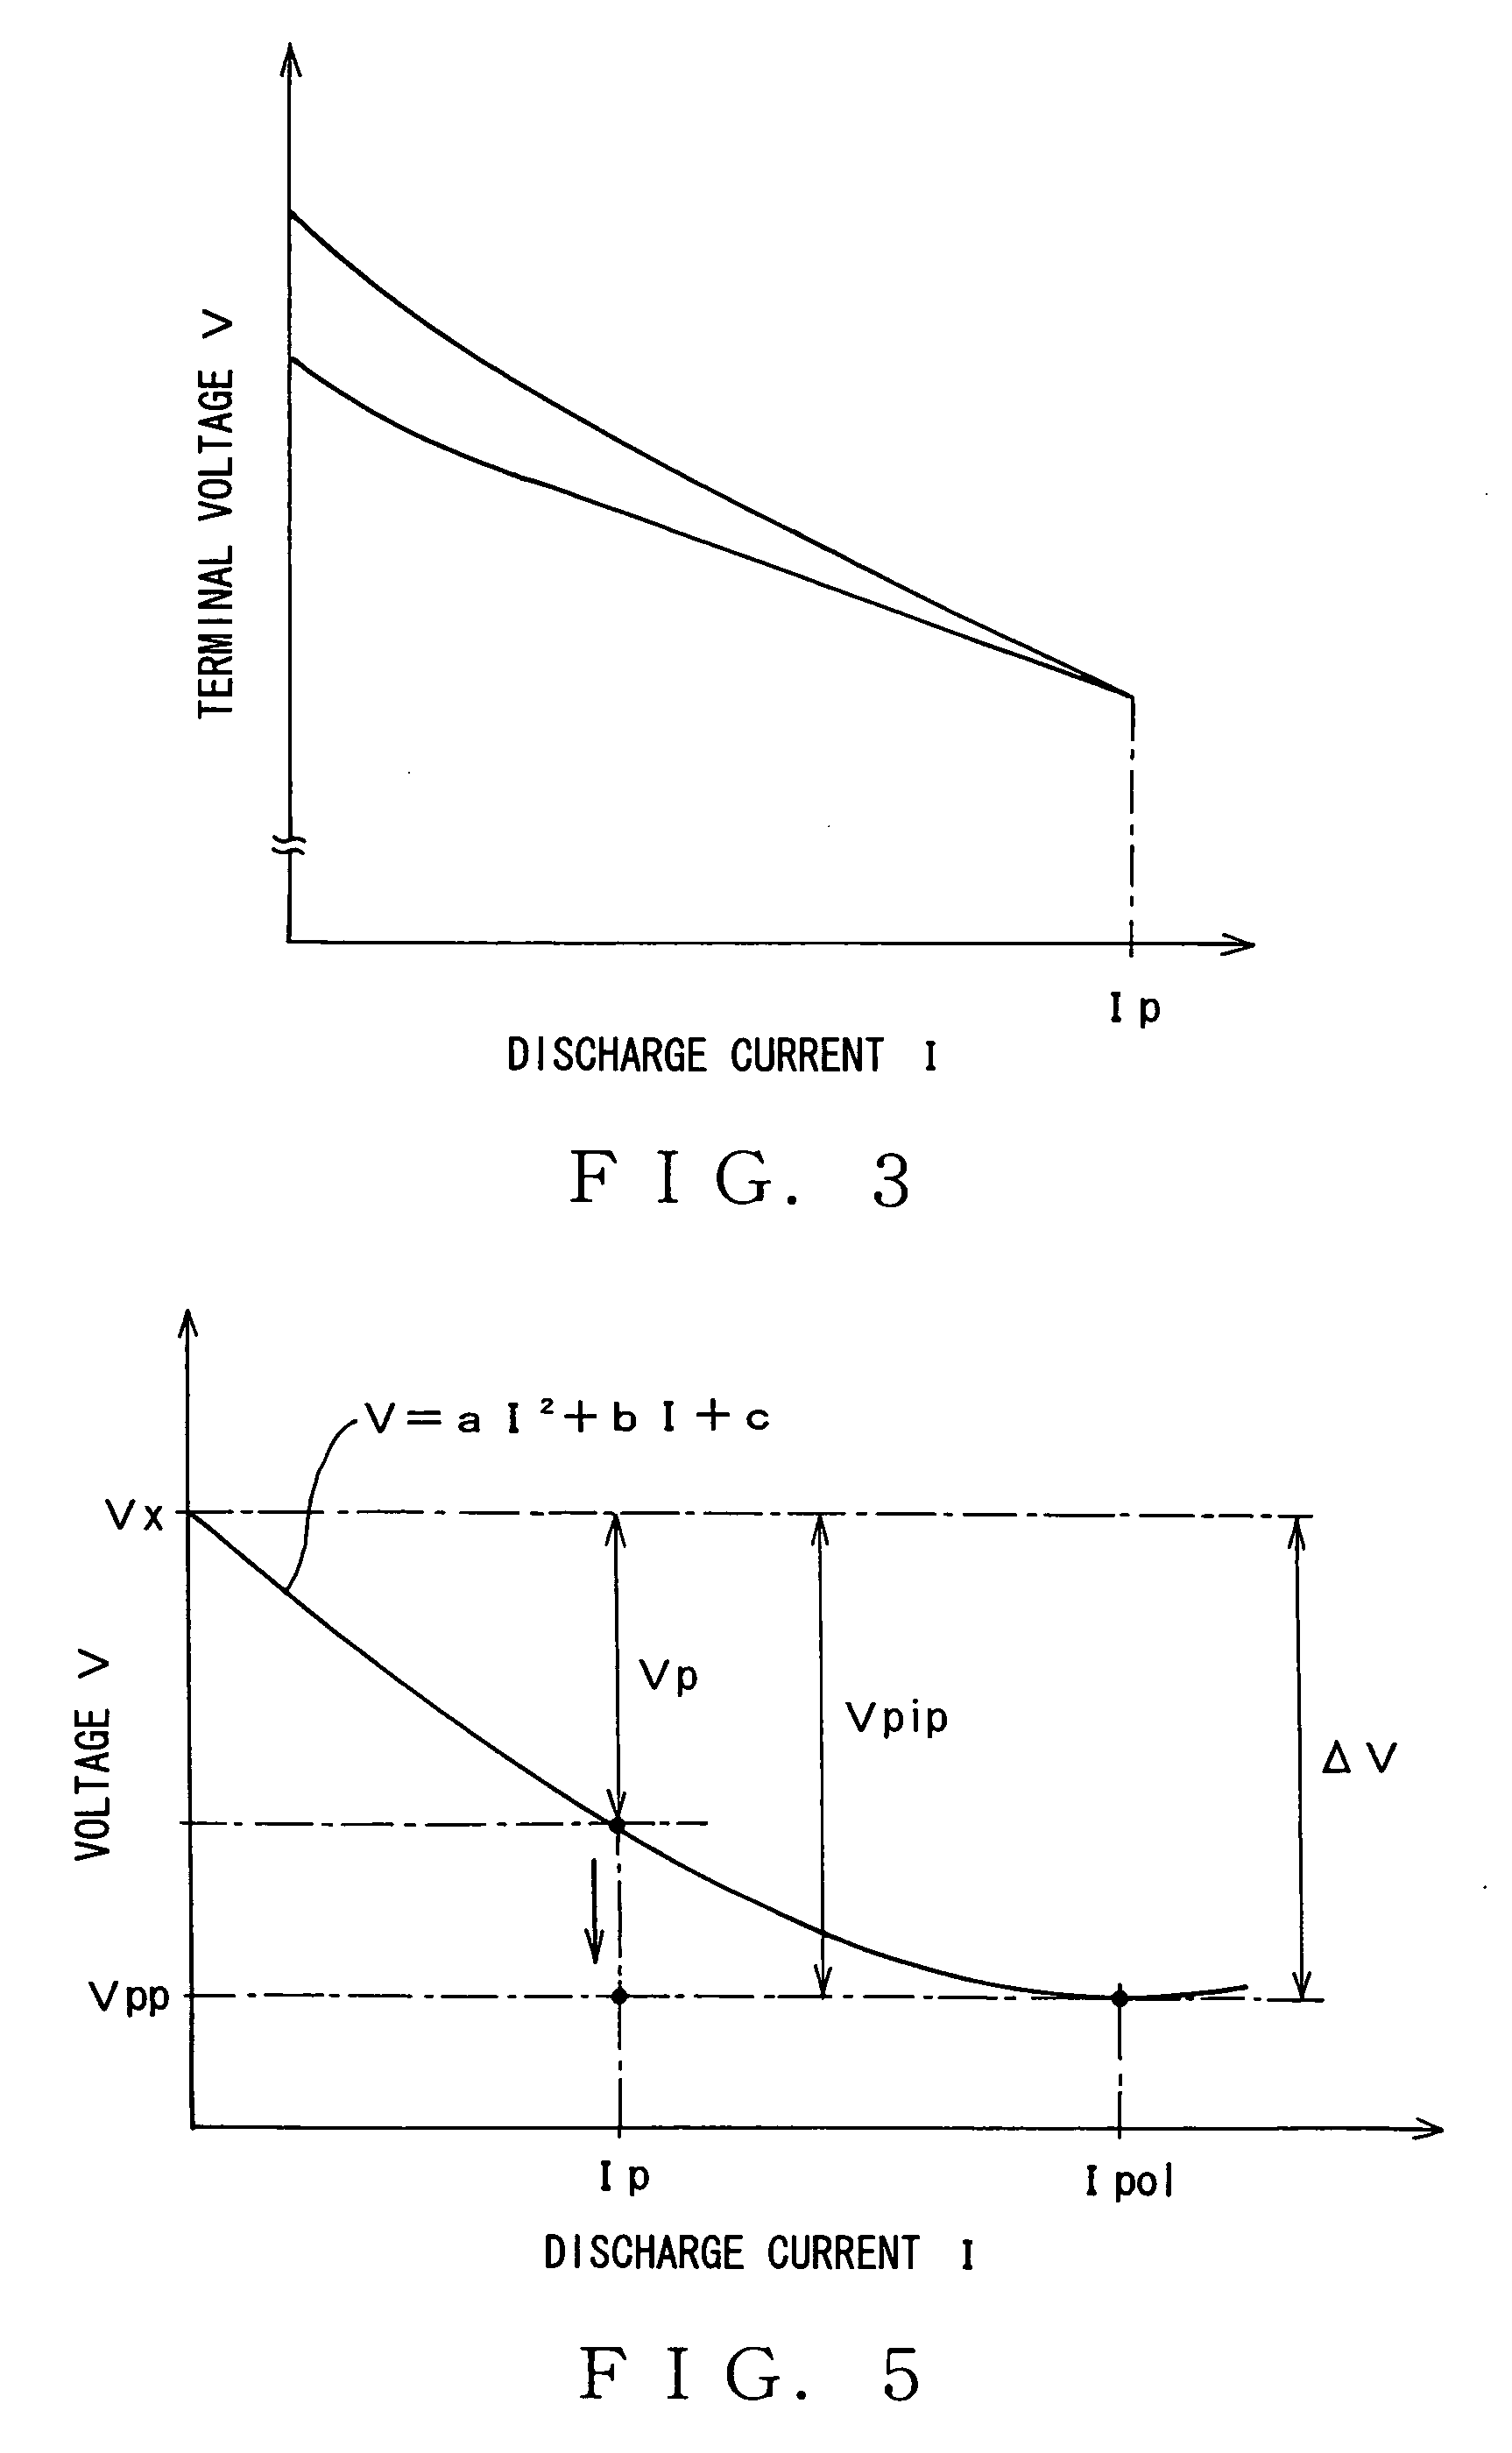 Method and device for estimating battery's dischargeable capacity